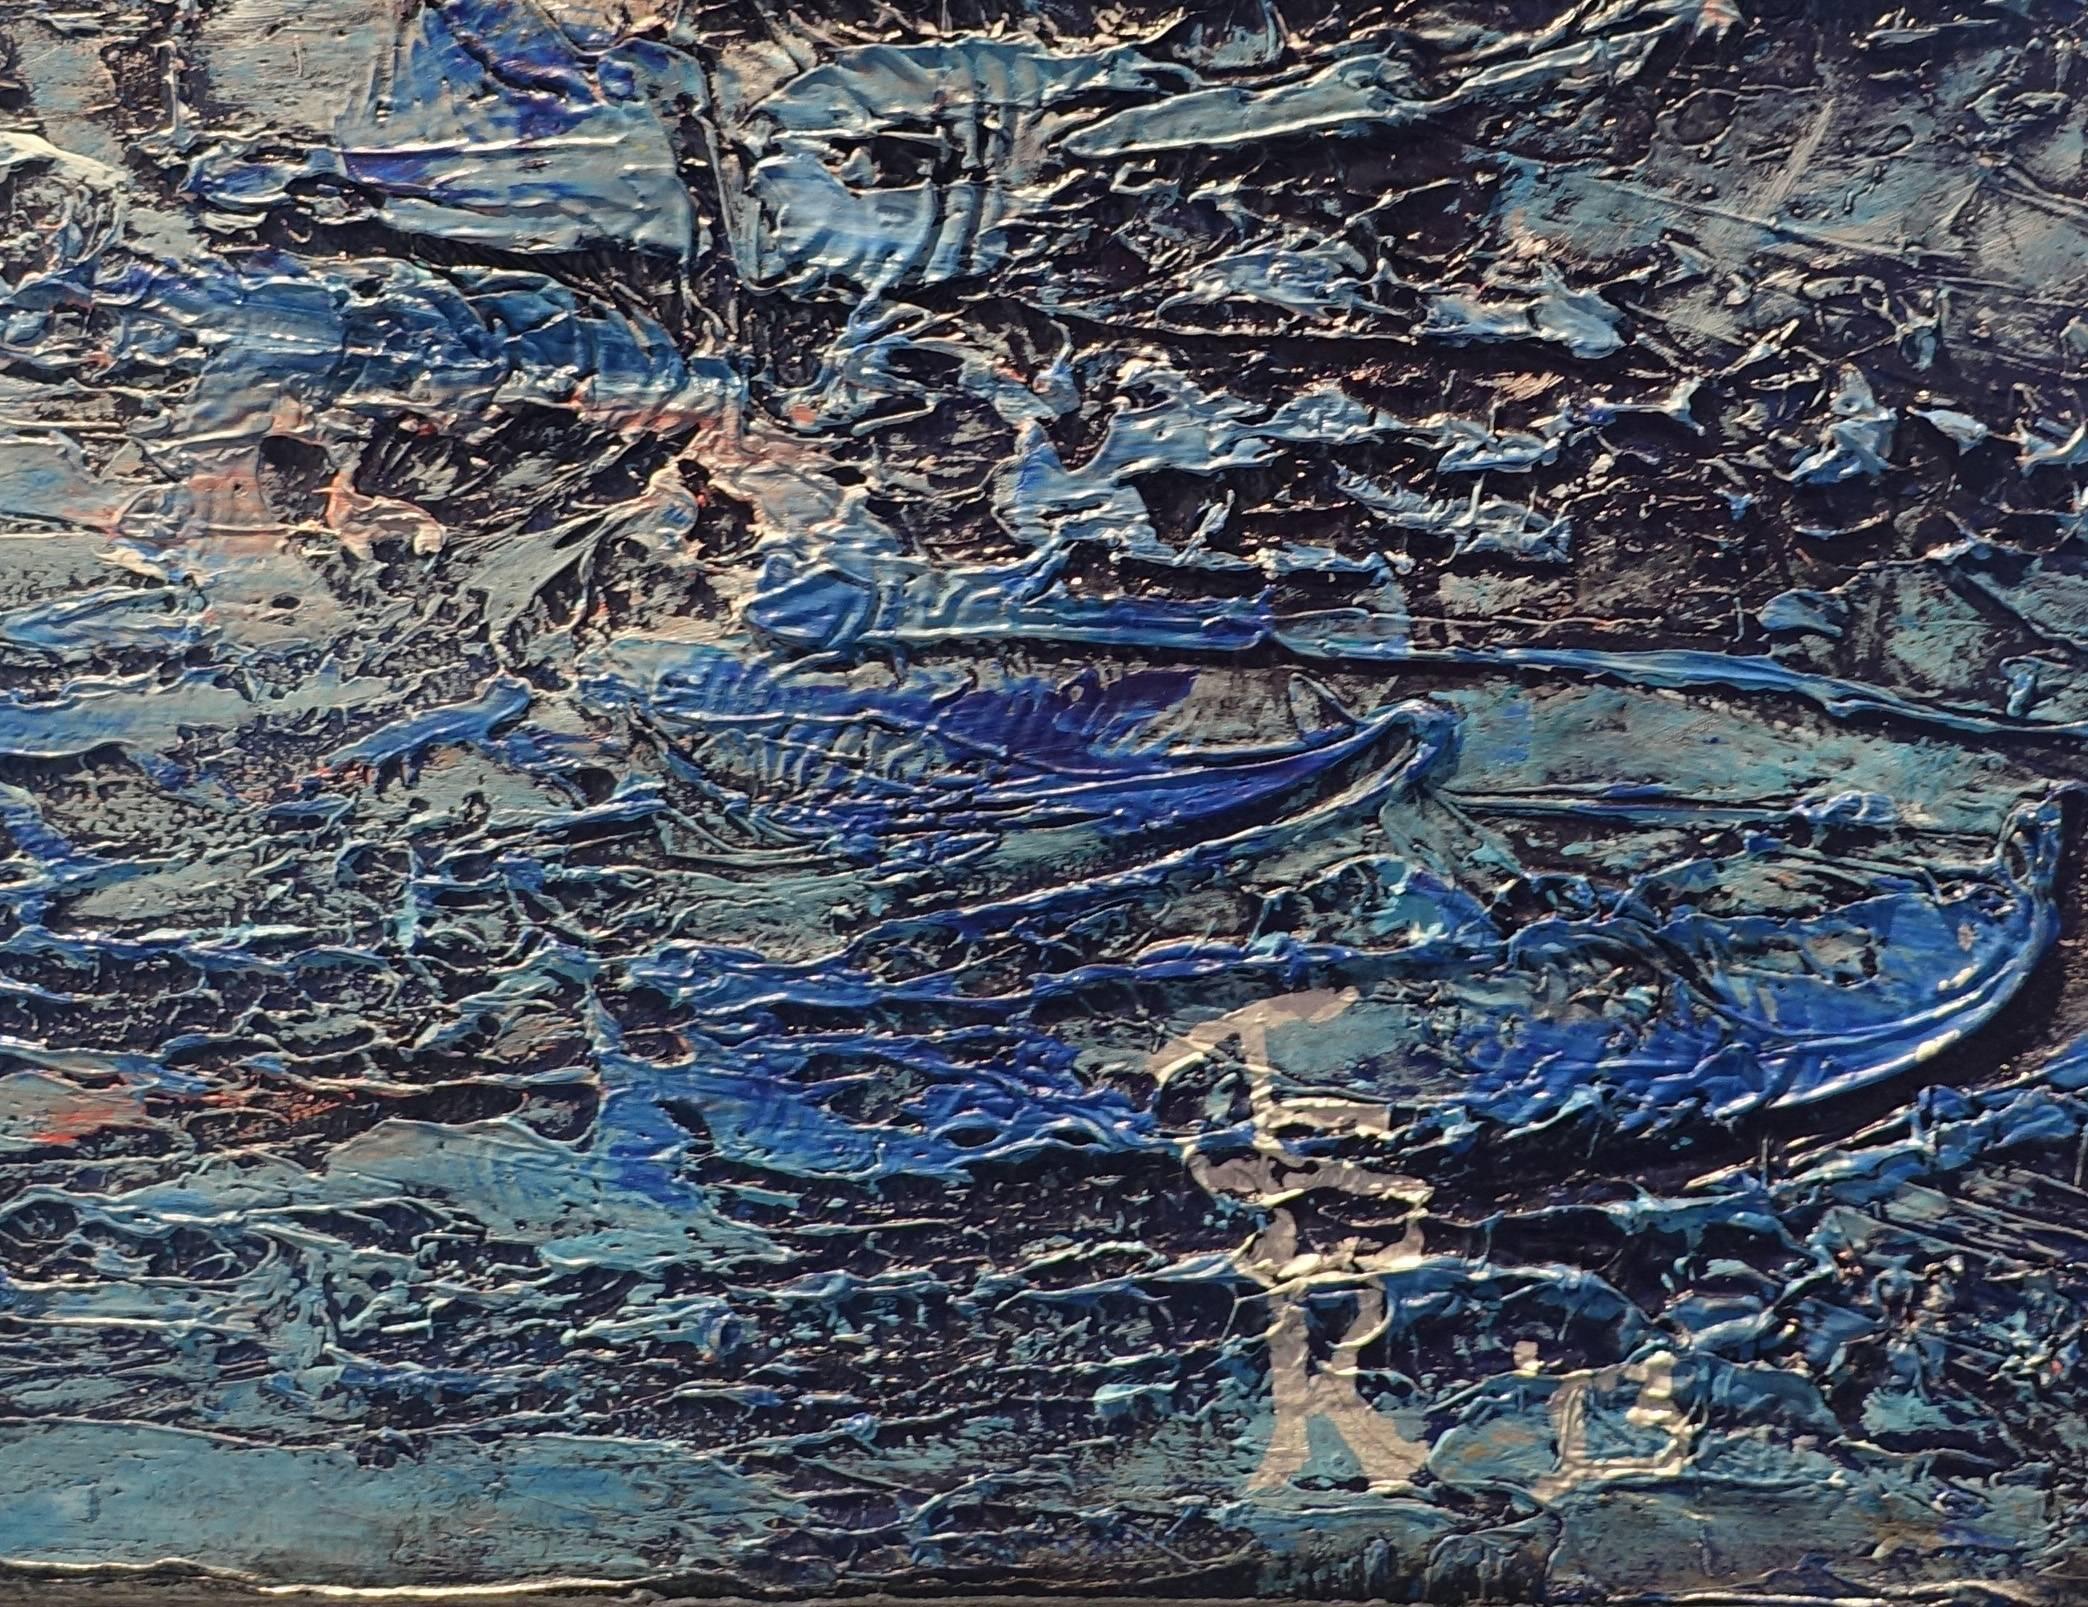 Escape (Blue, White, Water, Sky, Abstract Expressionist Painting) For Sale 1